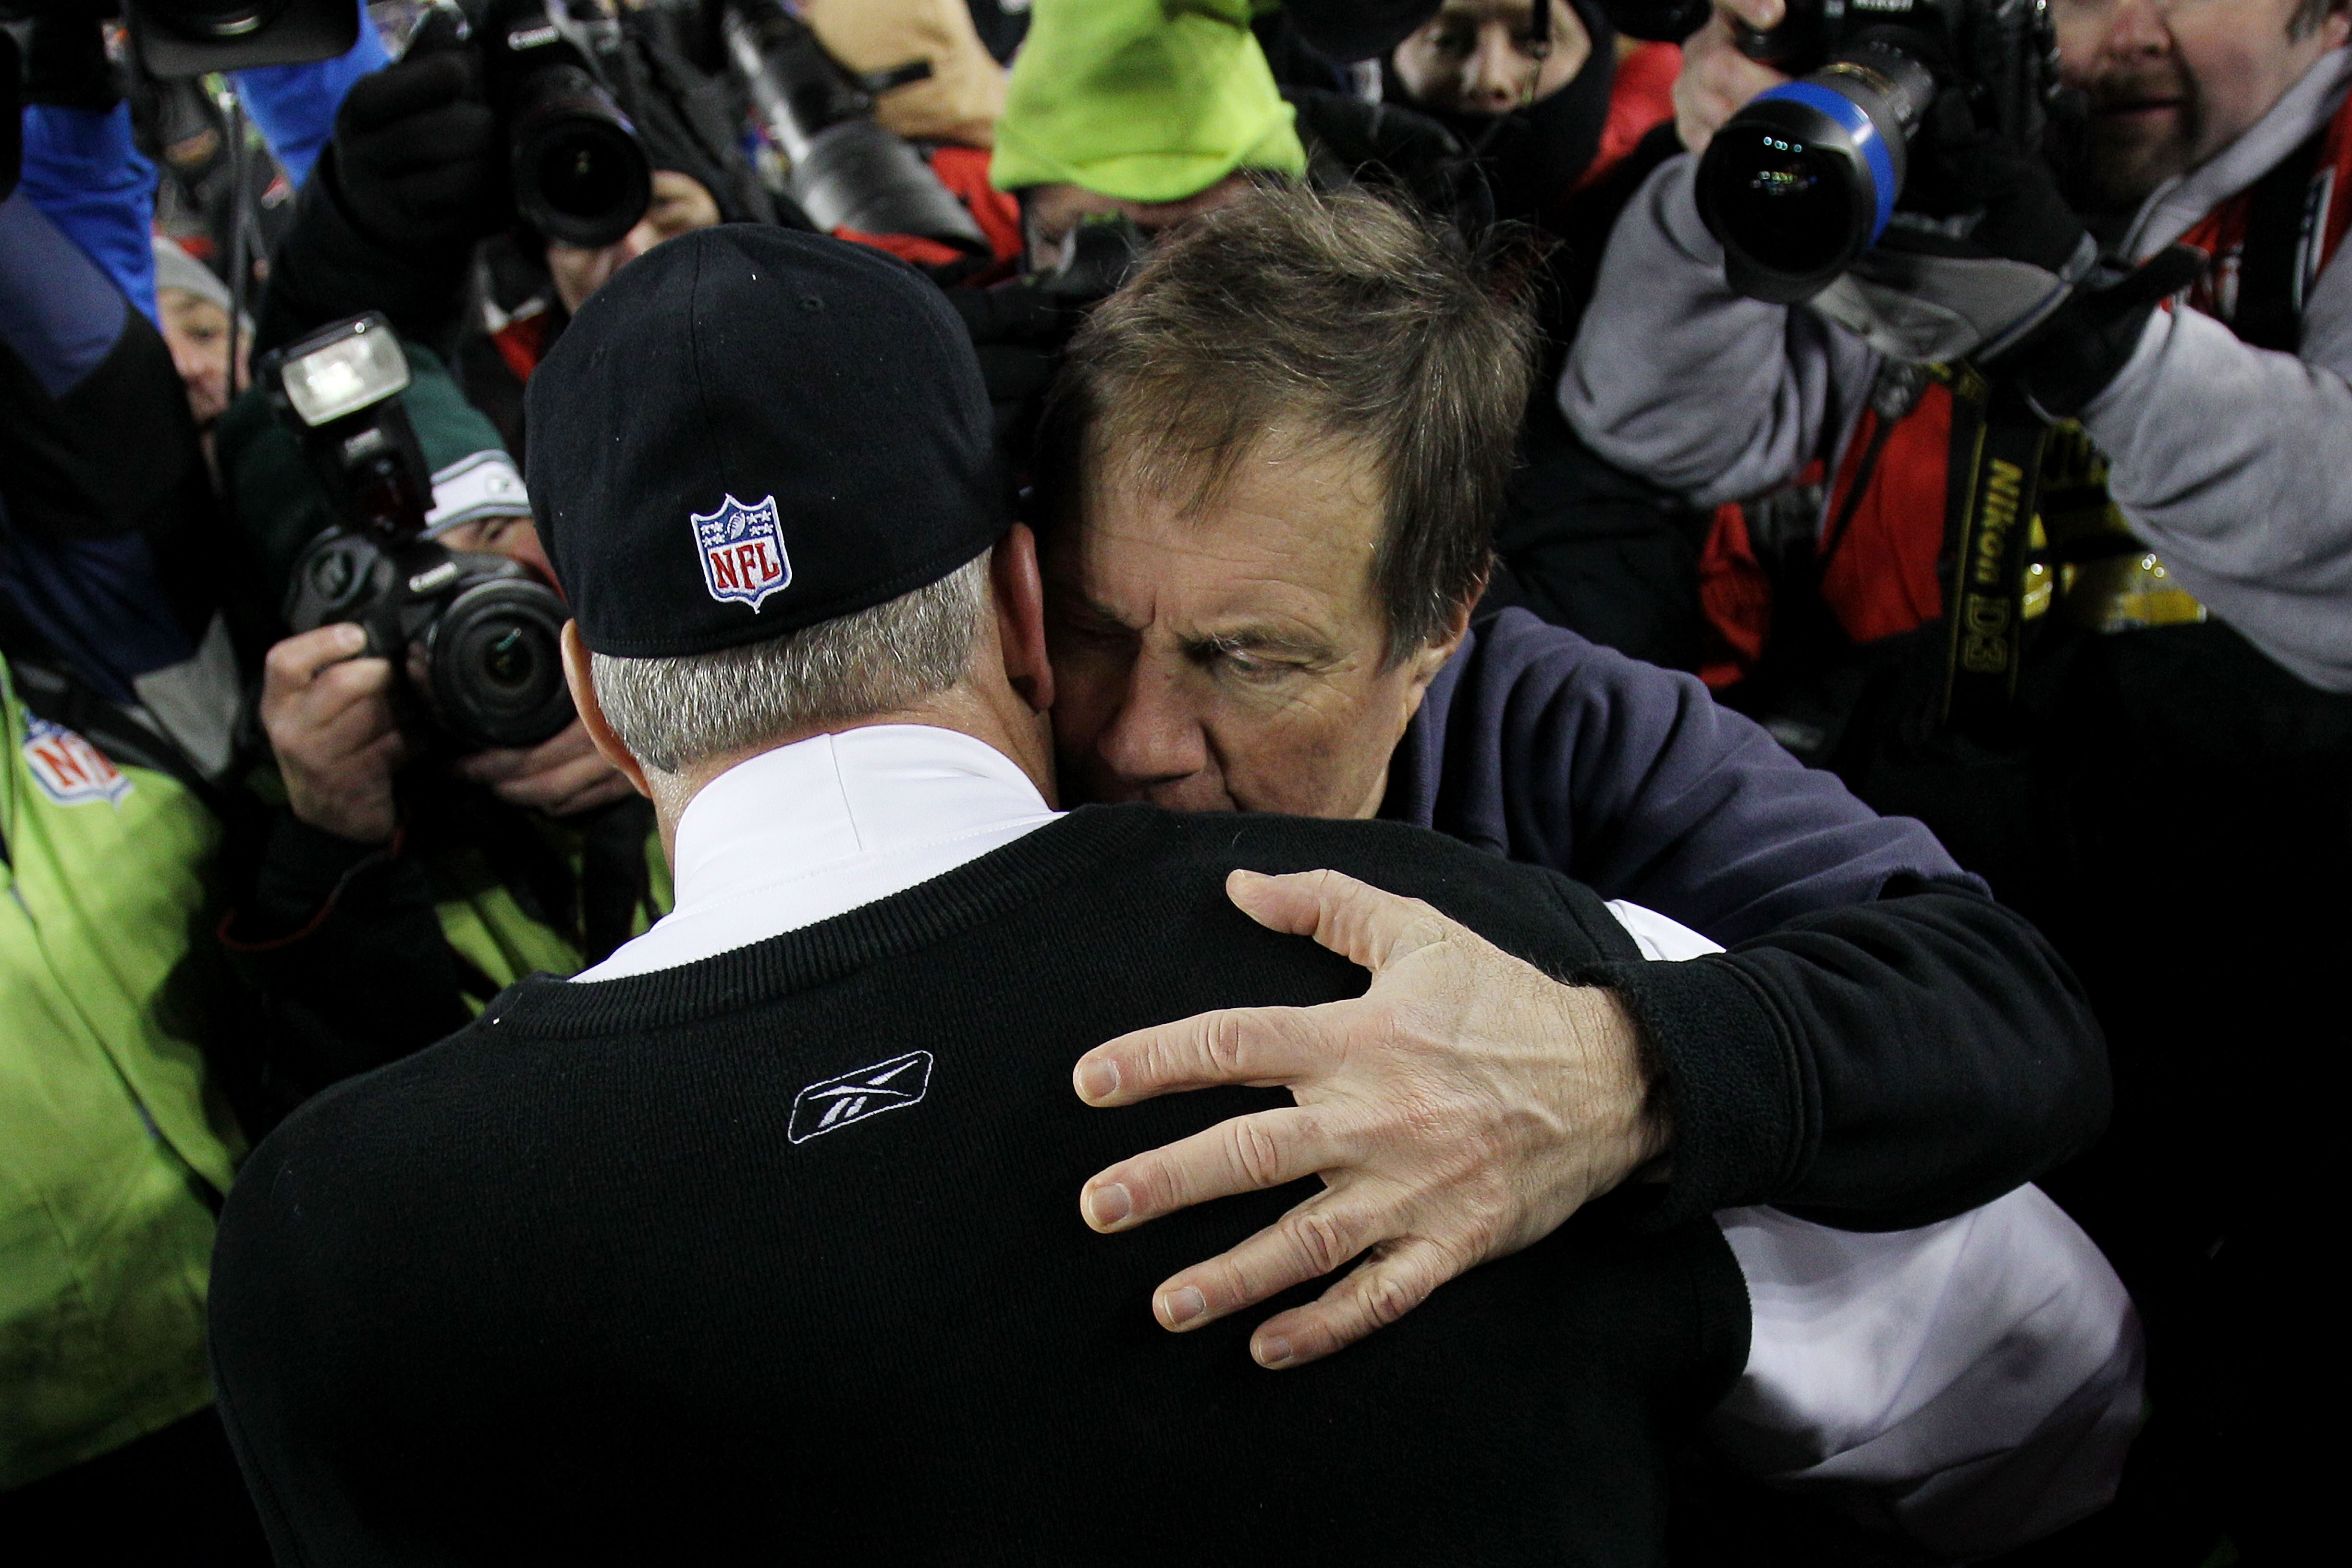 FOXBORO, MA - JANUARY 16:  Head coach Bill Belichick of the New England Patriots hugs head coach Rex Ryan of the New York Jets following their 2011 AFC divisional playoff game at Gillette Stadium on January 16, 2011 in Foxboro, Massachusetts.  (Photo by E